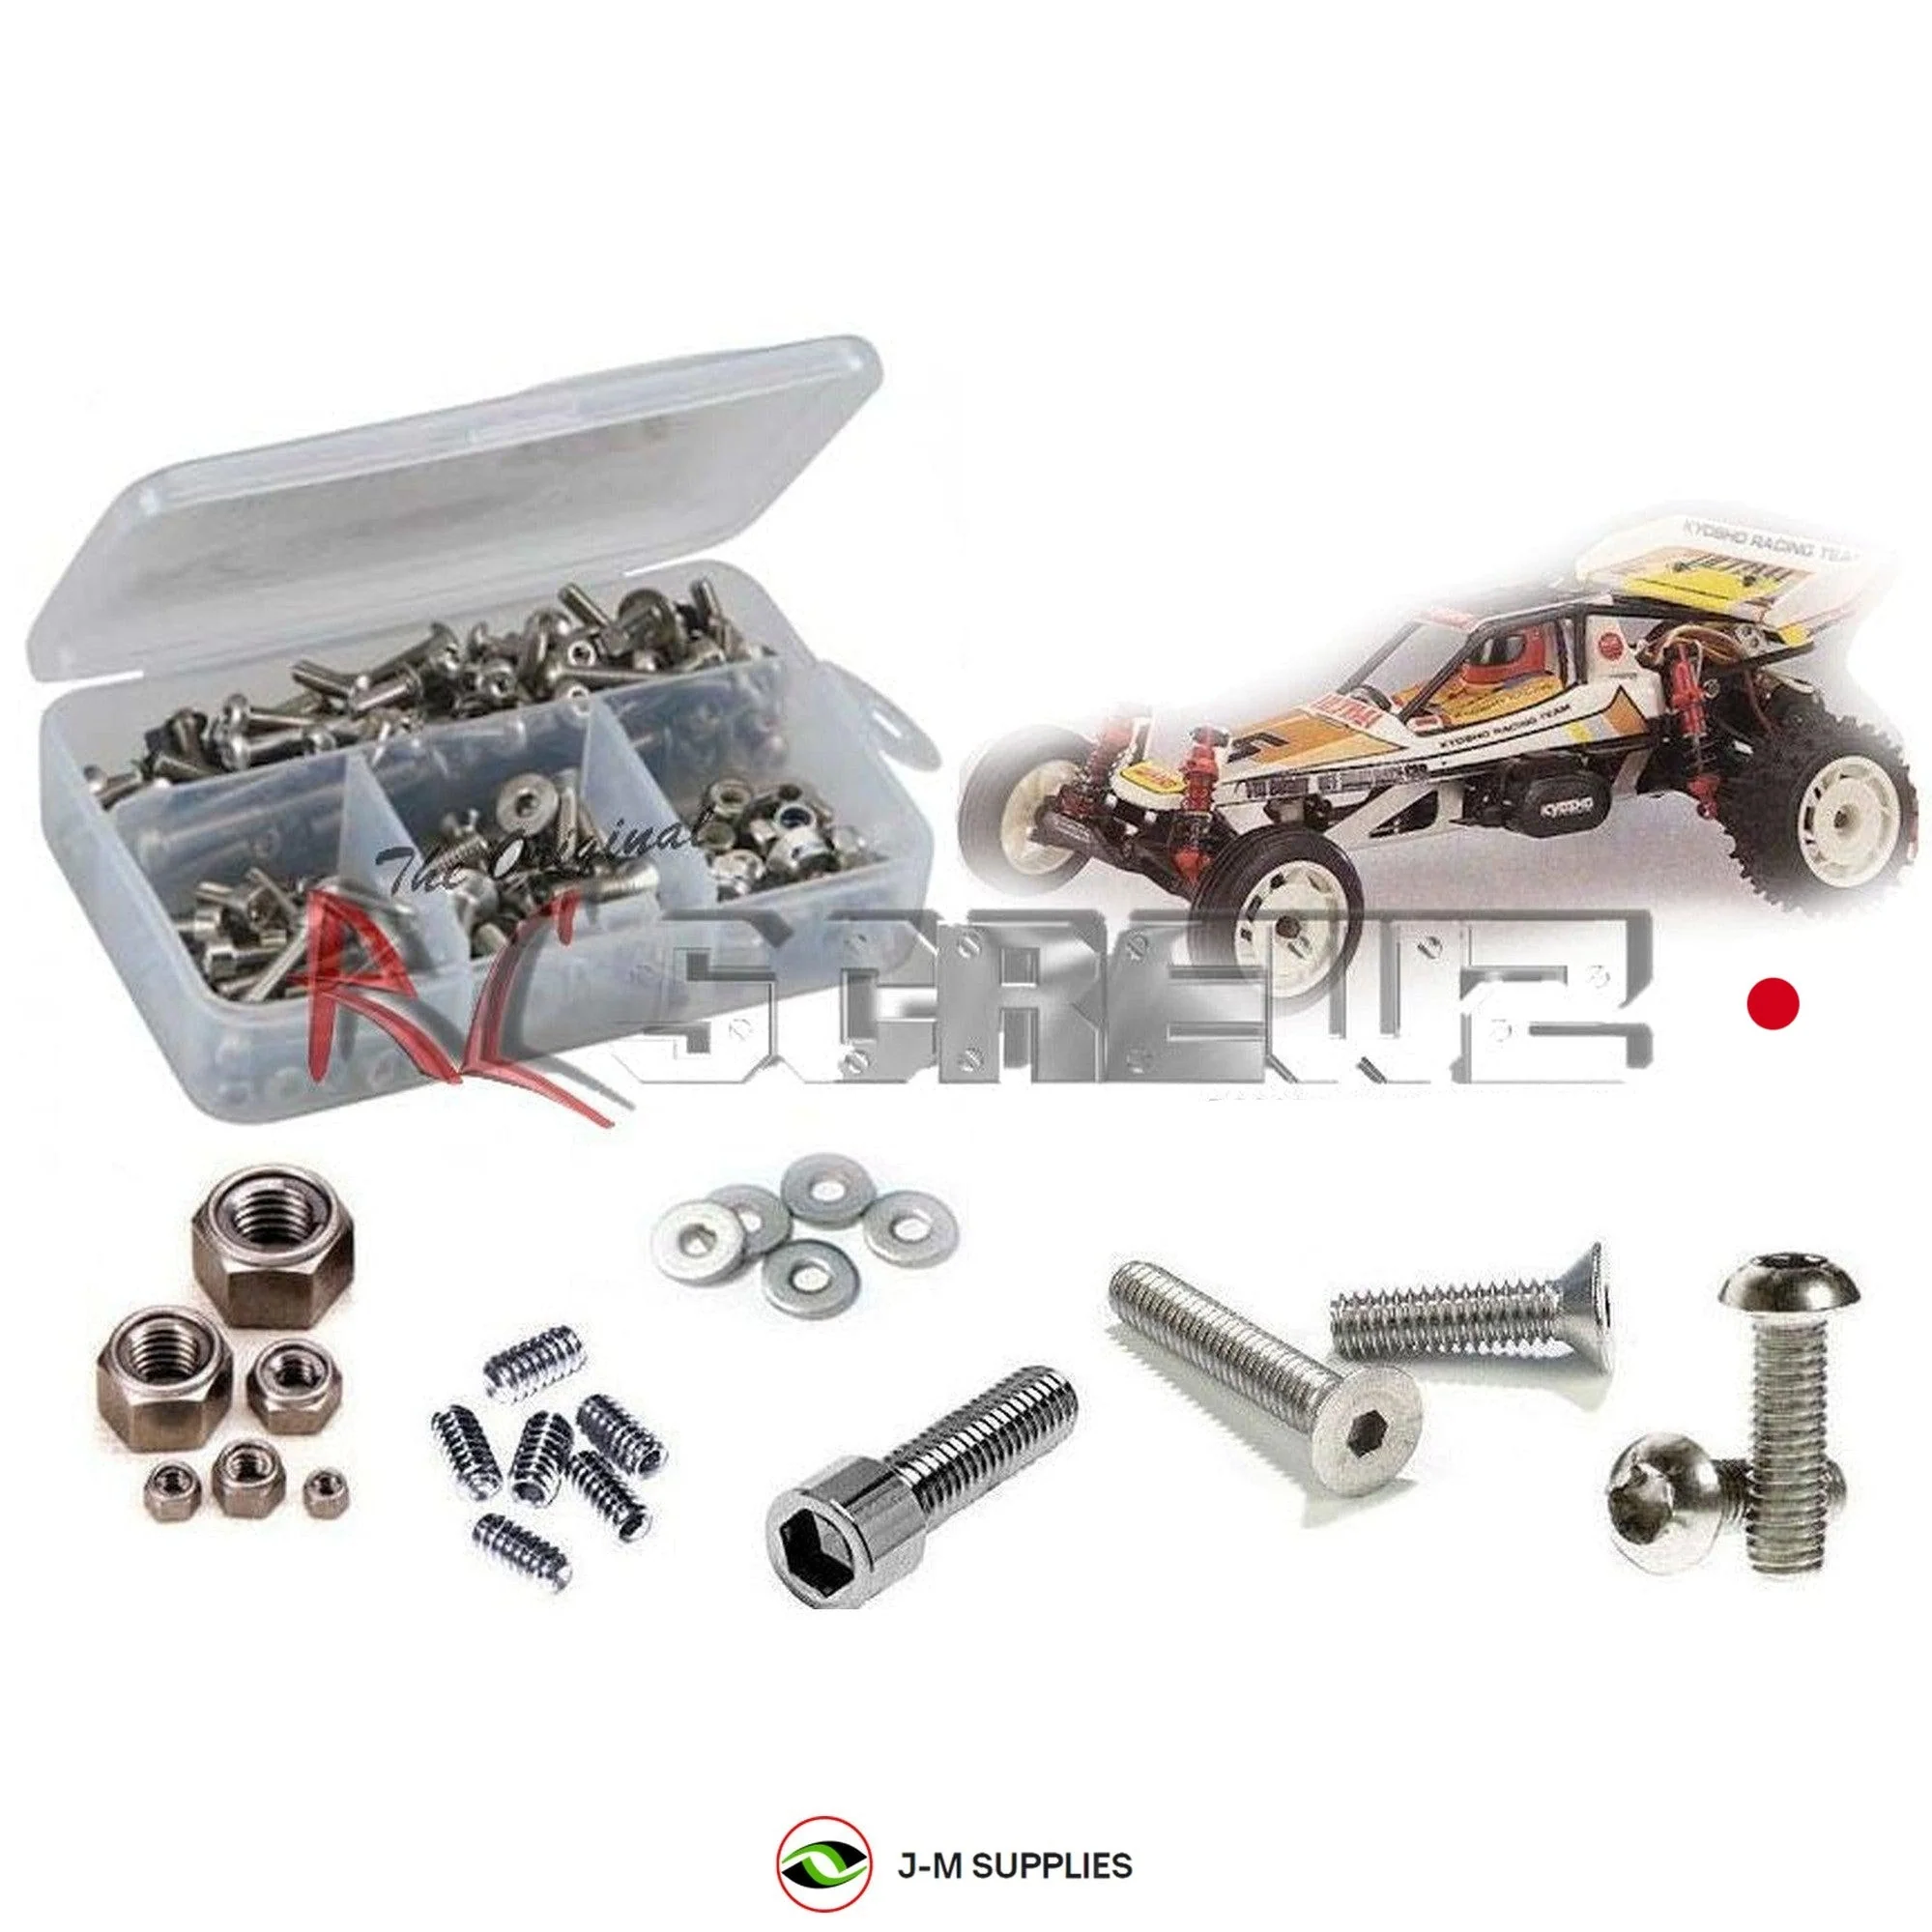 RCScrewZ Stainless Screw Kit for Kyosho Ultima 1/10 Buggy #3115/Vintage kyo073 - Picture 1 of 12